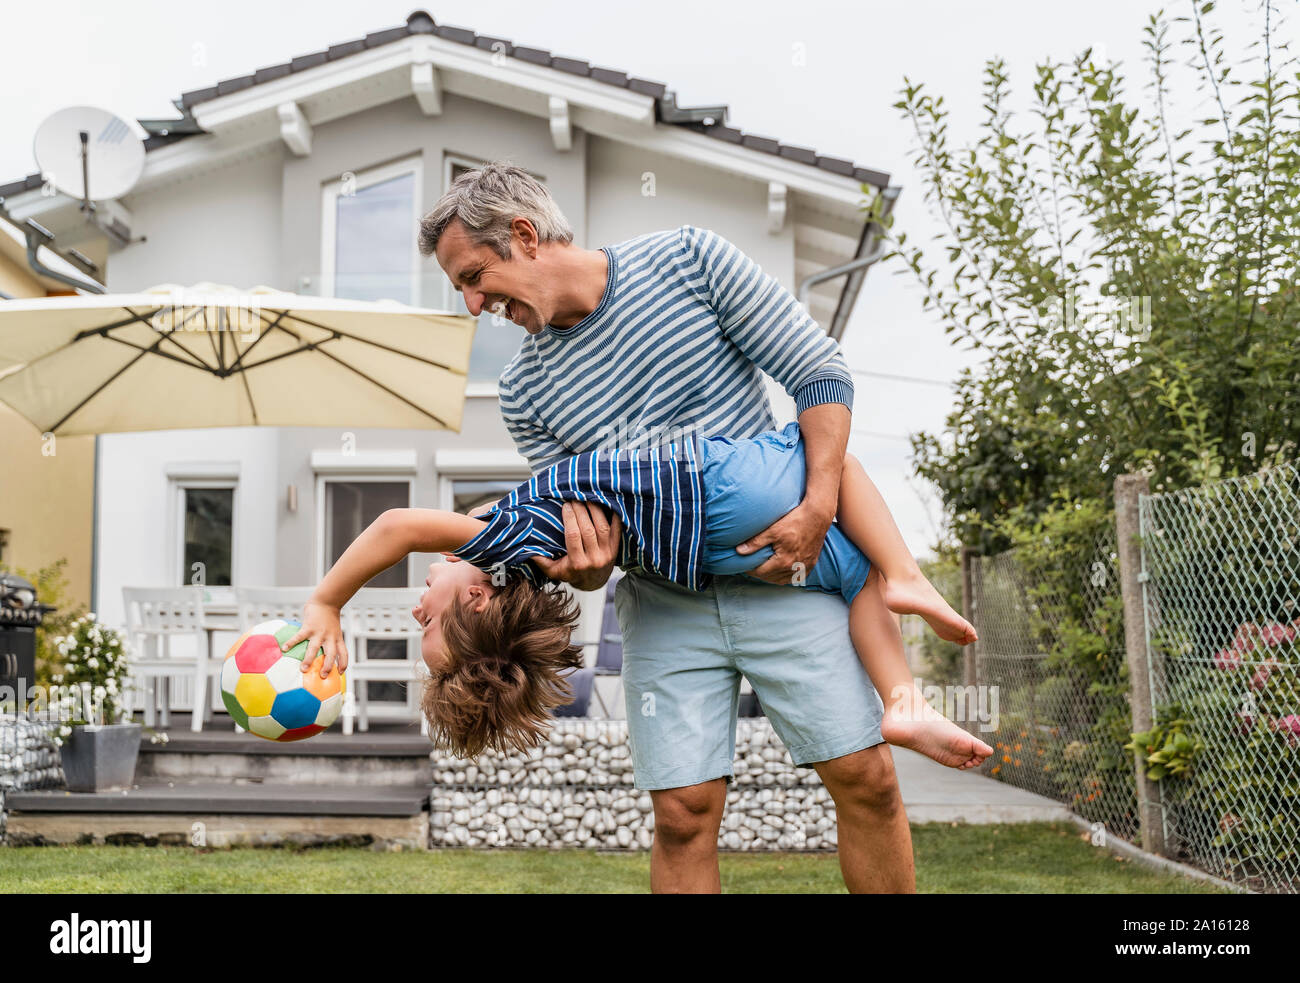 Playful father and son with football in garden Stock Photo